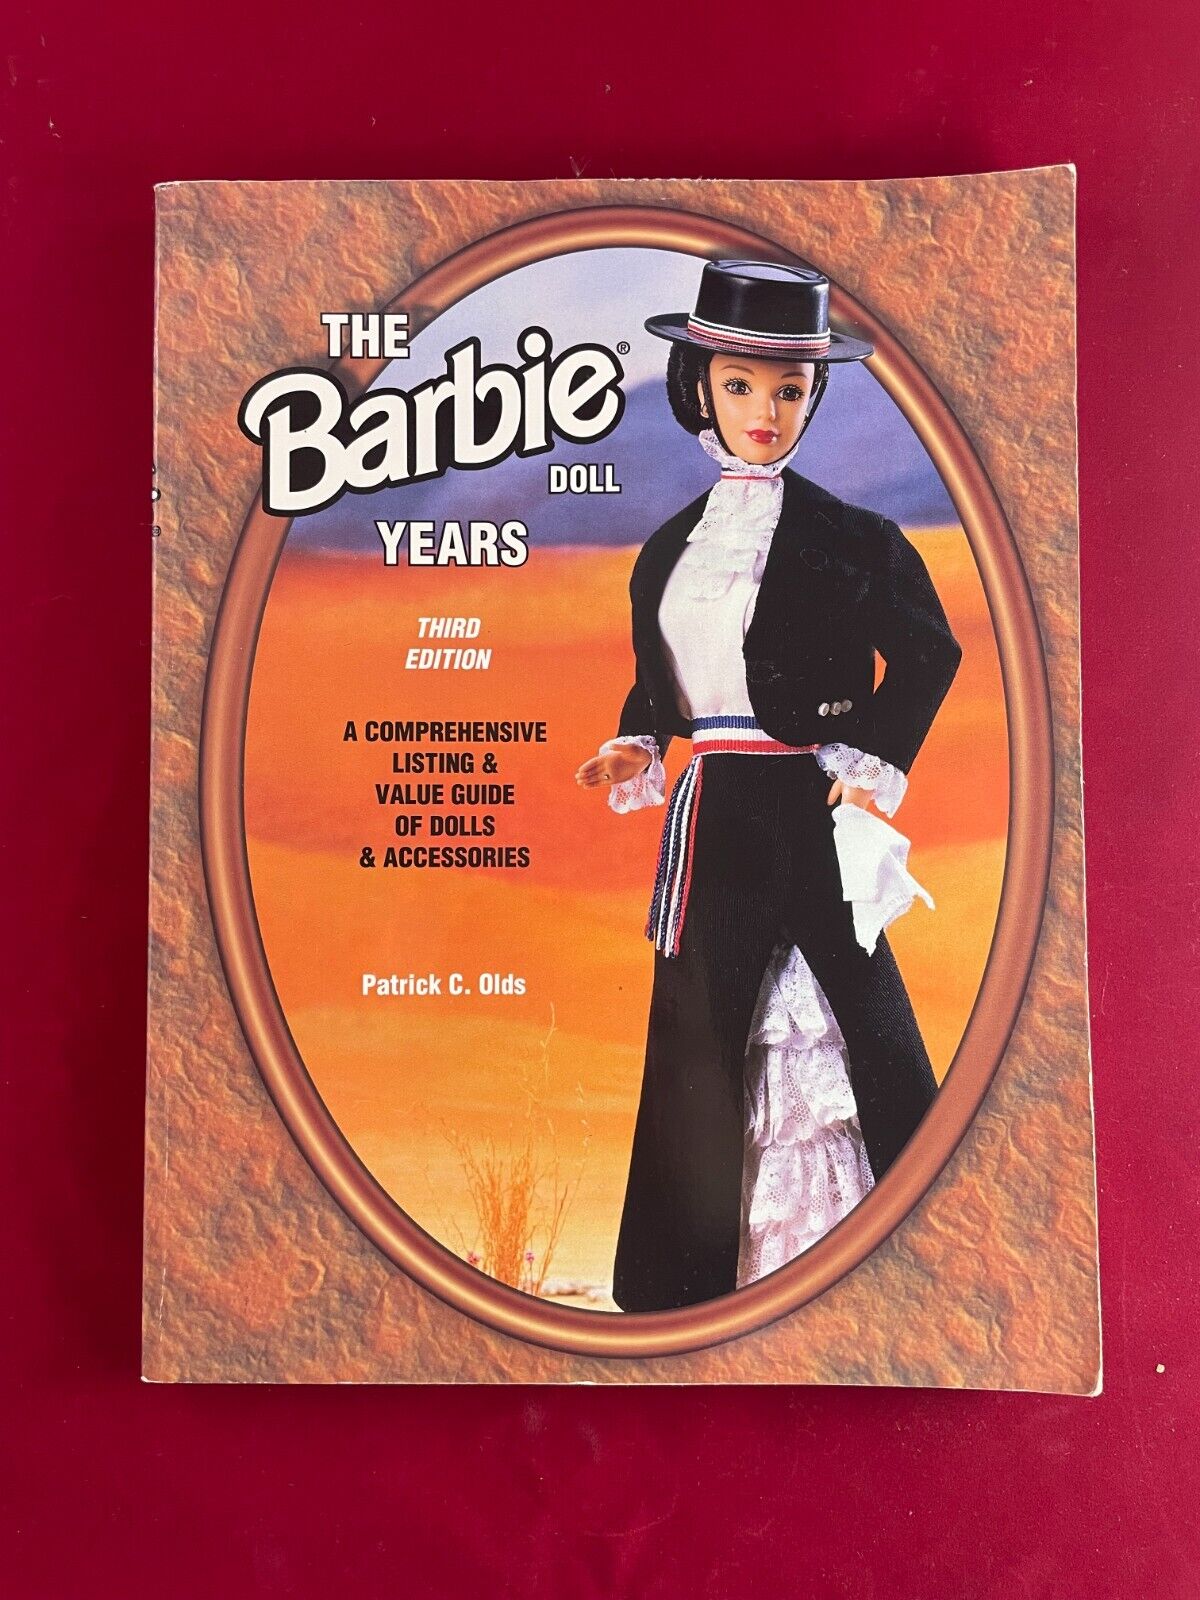 The Barbie Doll Years - Third Edition